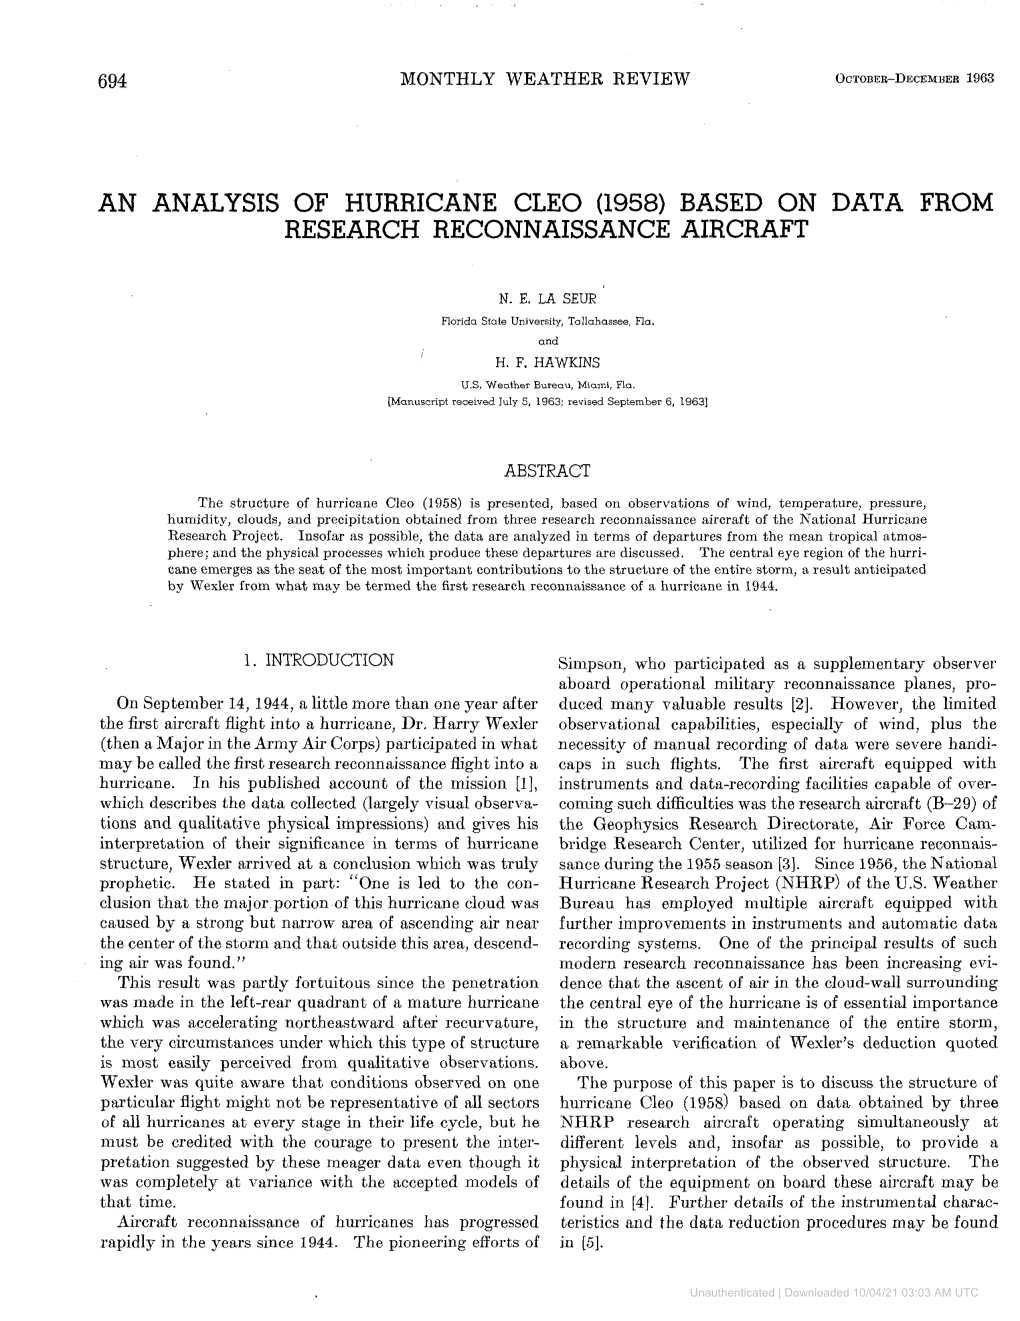 An Analysis of Hurricane Cleo (1958) Based on Data from Research Reconnaissance Aircraft